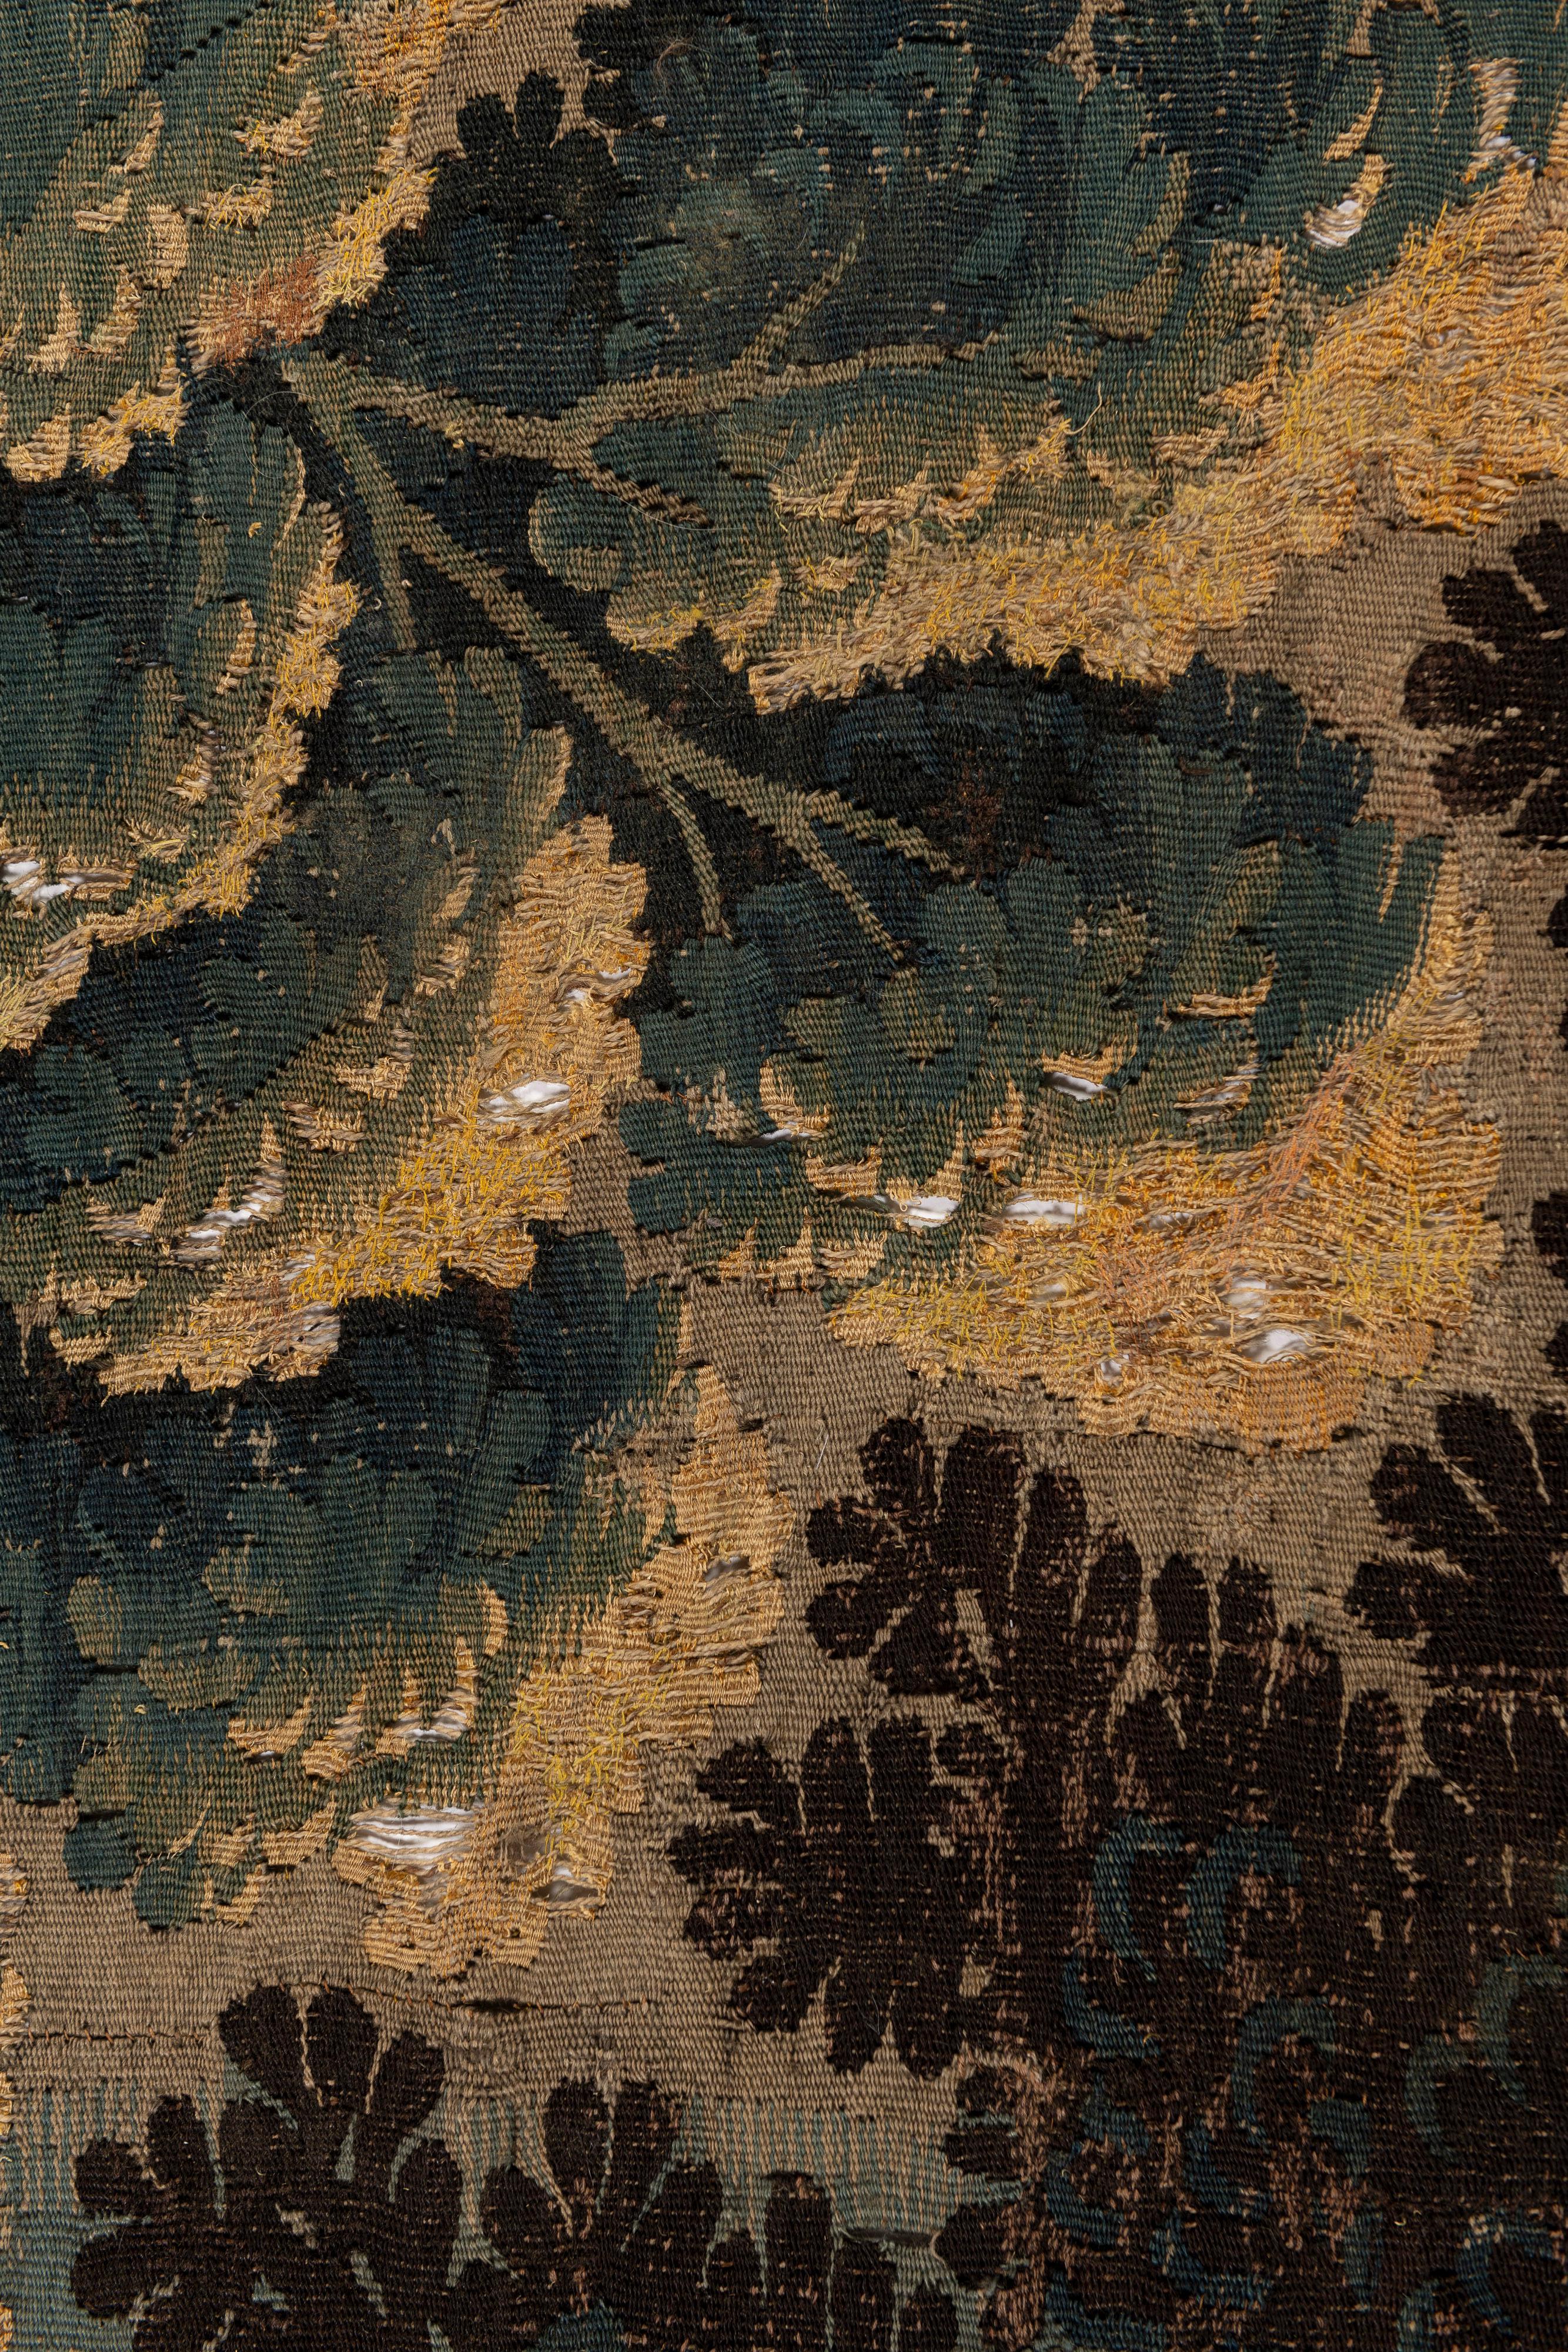 Wool Hand-Woven Antique 17th Century Aubusson Verdure Tapestry, France For Sale